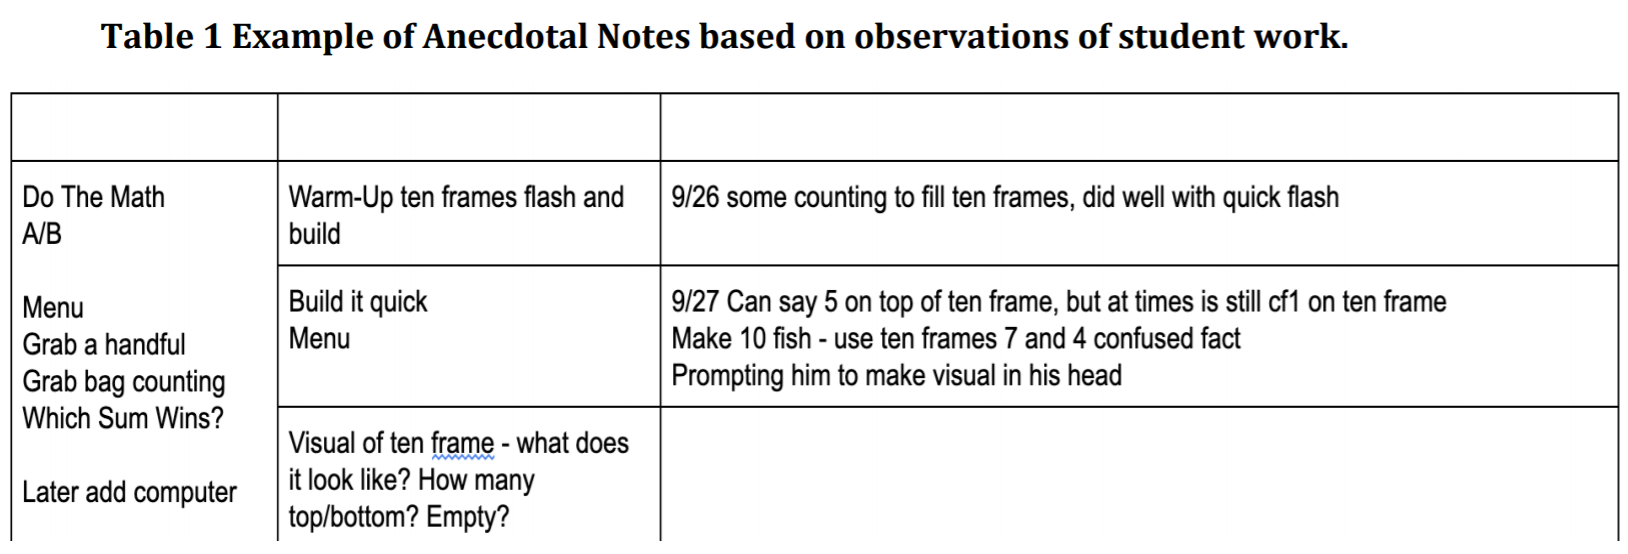 Table 1 Example of Anecdotal Notes based on observations of student work.